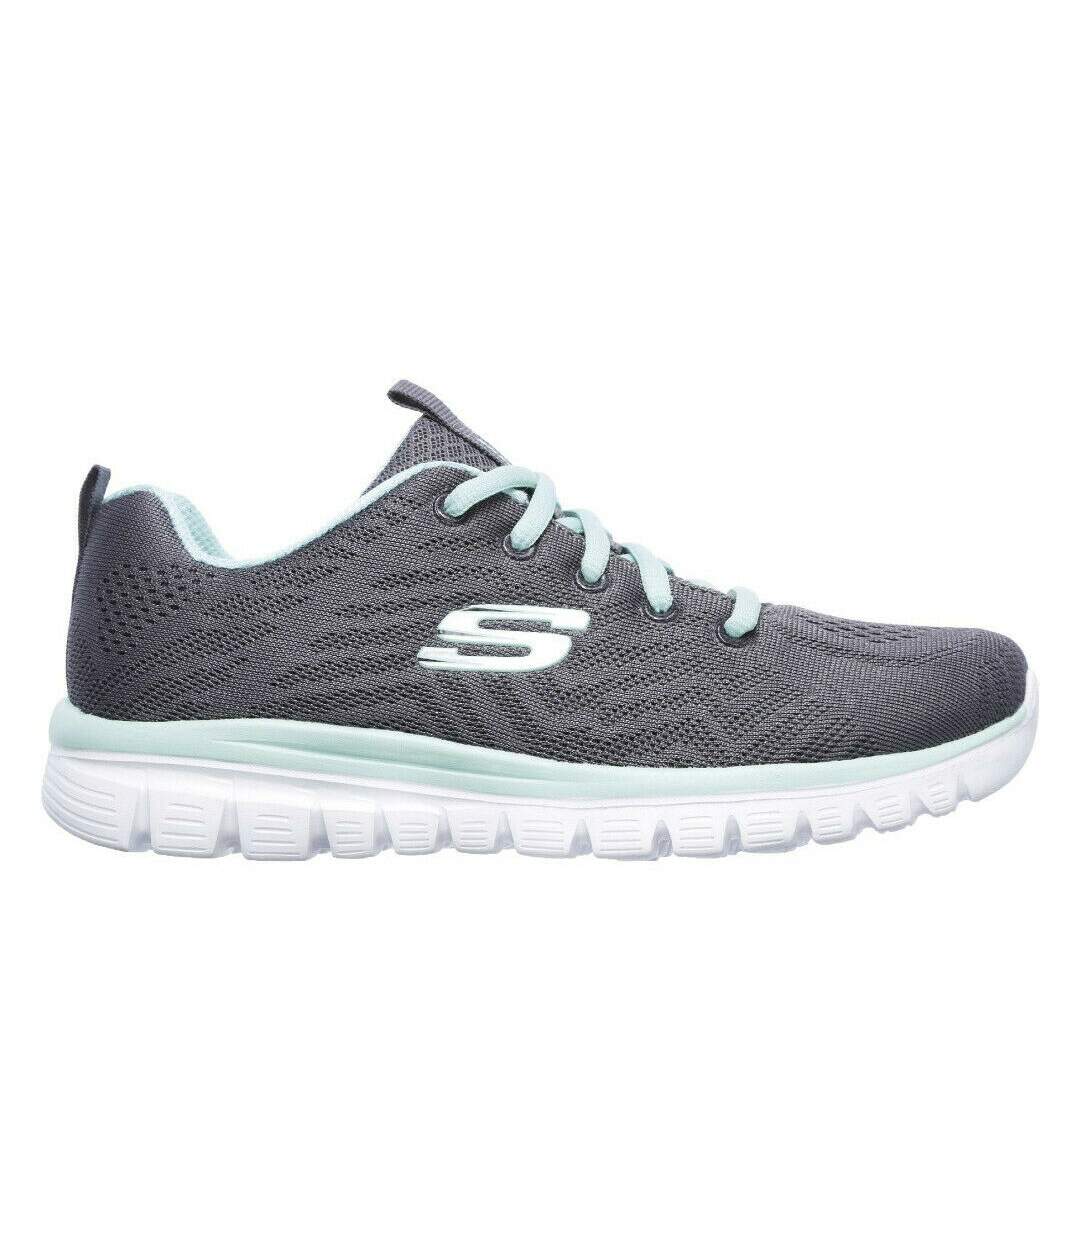 Skechers Womens/Ladies Graceful Get Connected Sports Trainer (Charcoal) - UTFS7076